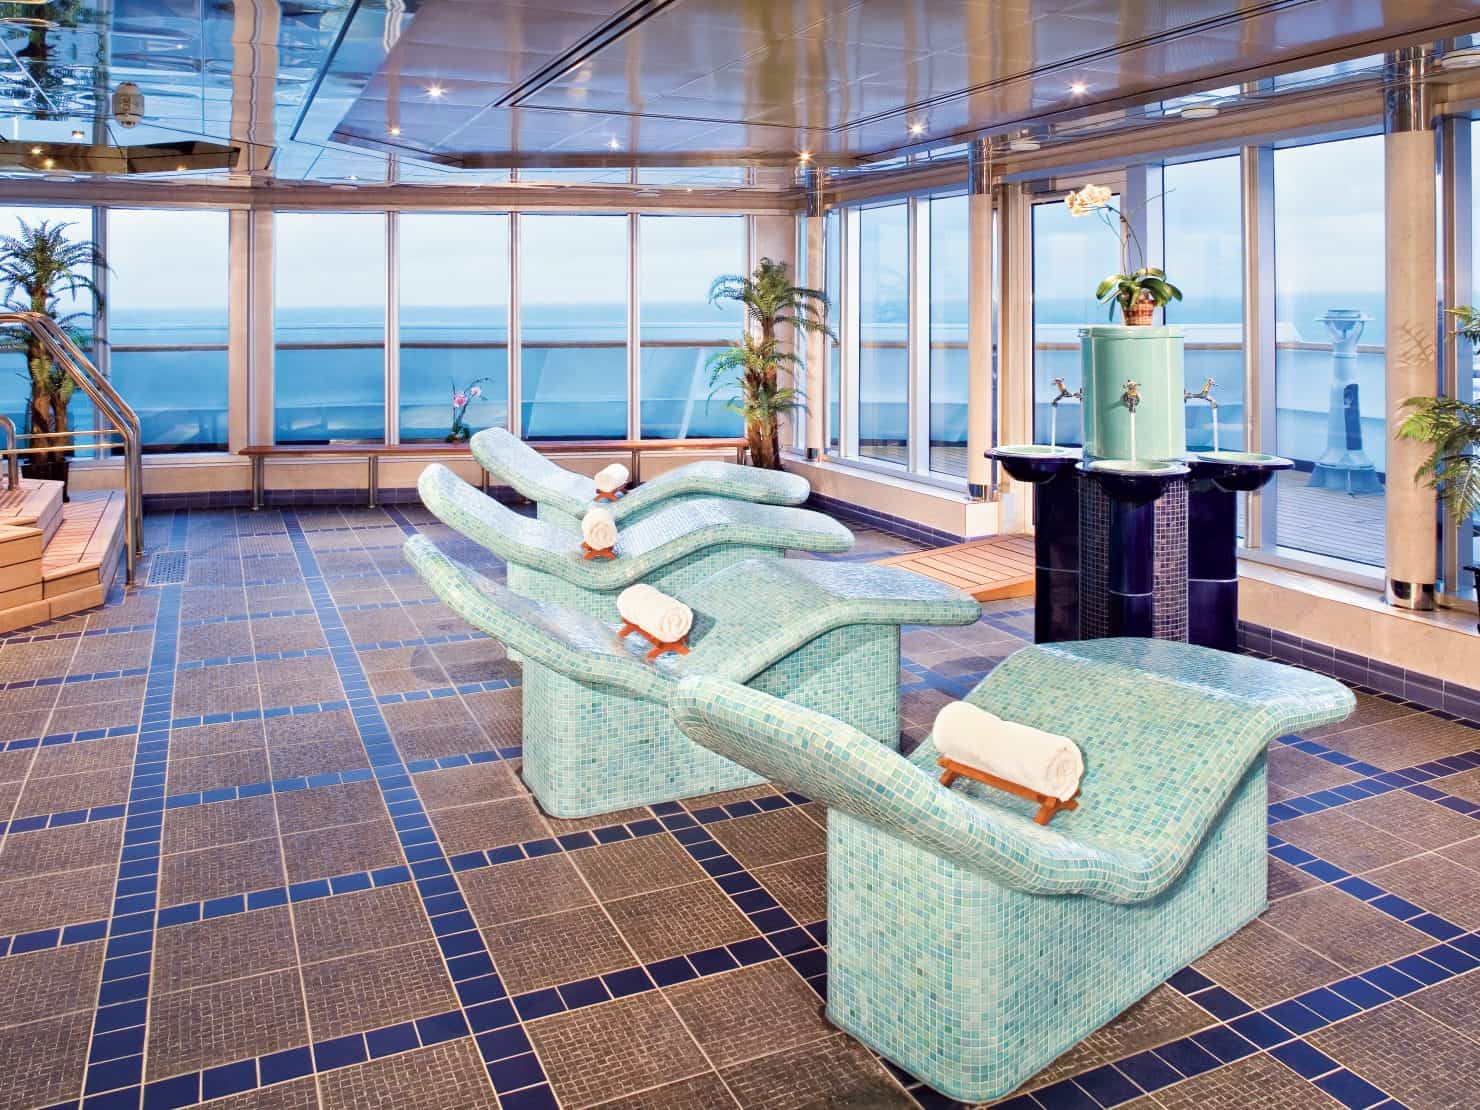 One of Holland America's onboard spas